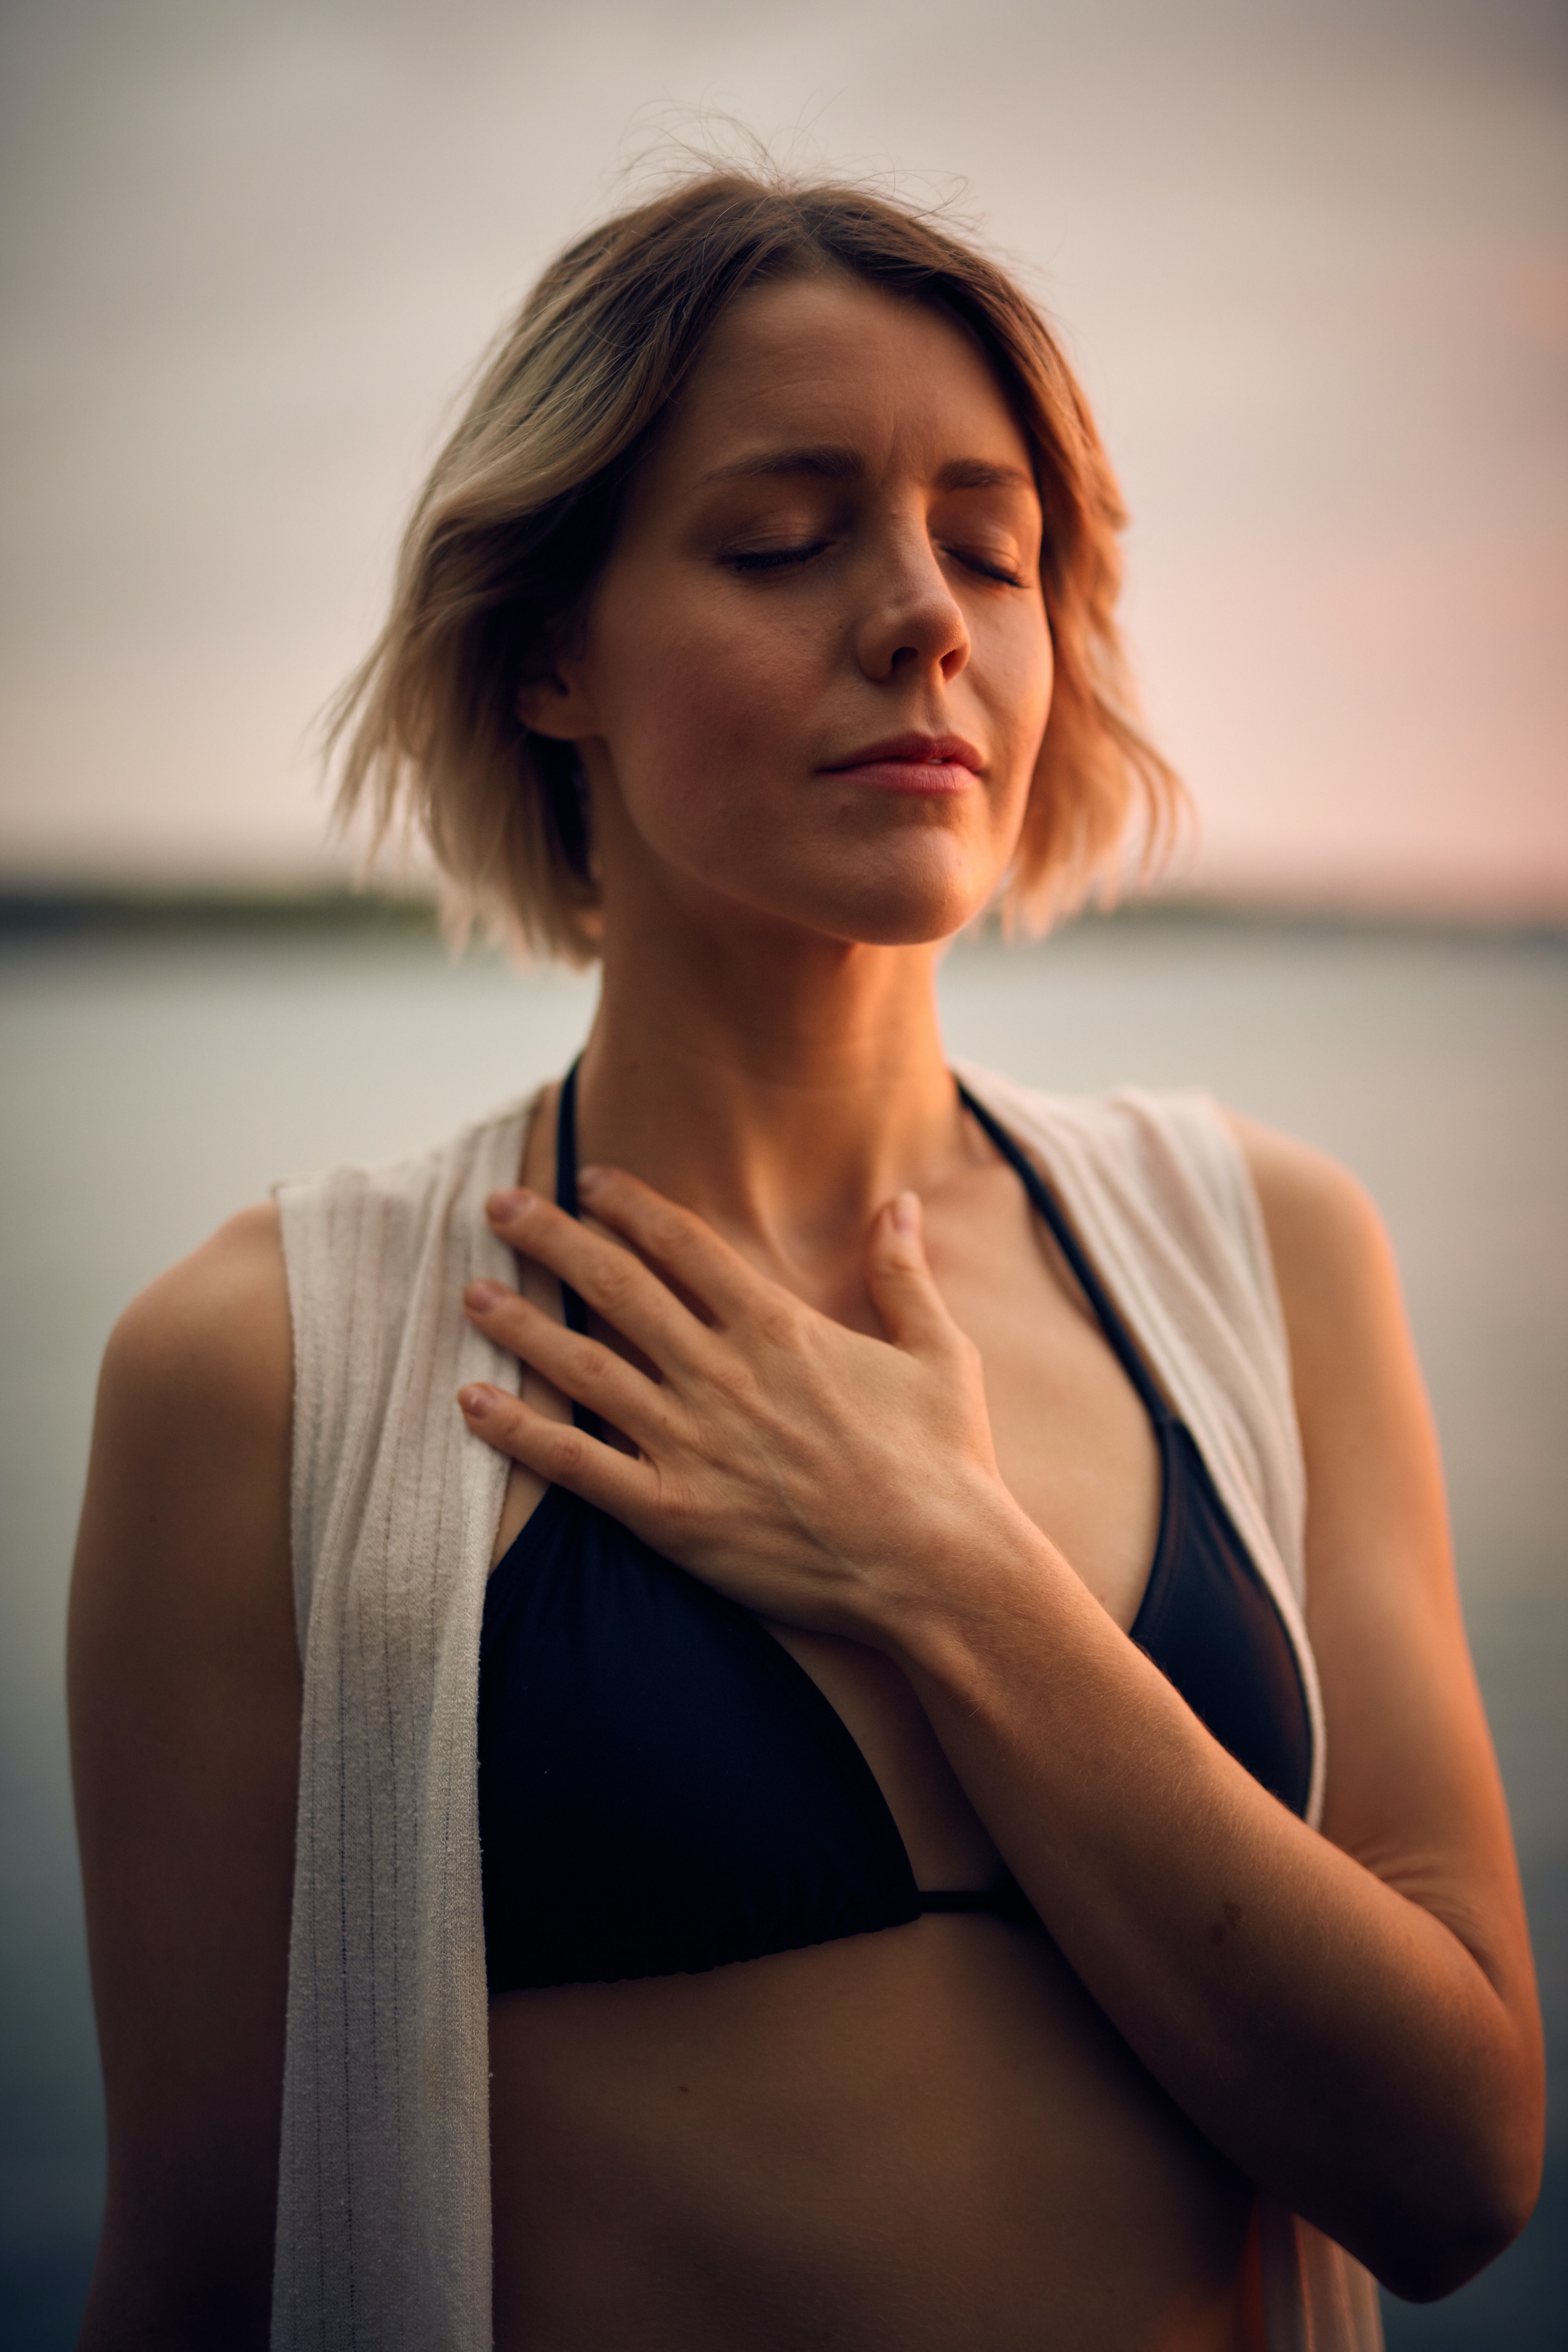 A photo of a woman with her hand placed on her chest | Source: Unsplash